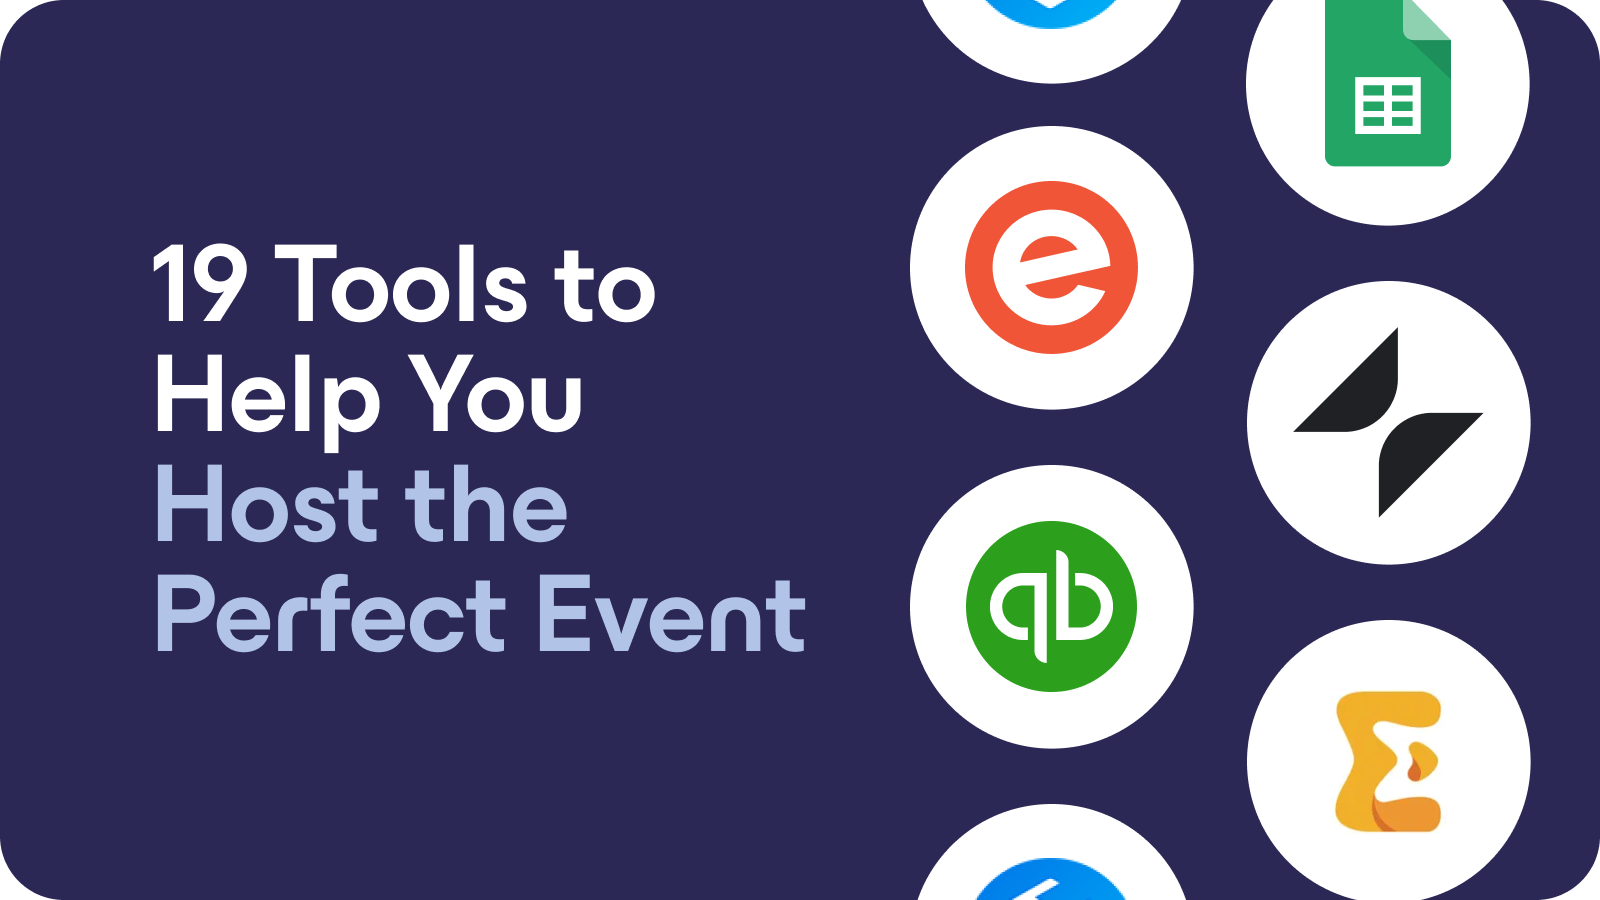 Event Apps: 19 Tools to Help You Host the Perfect Event